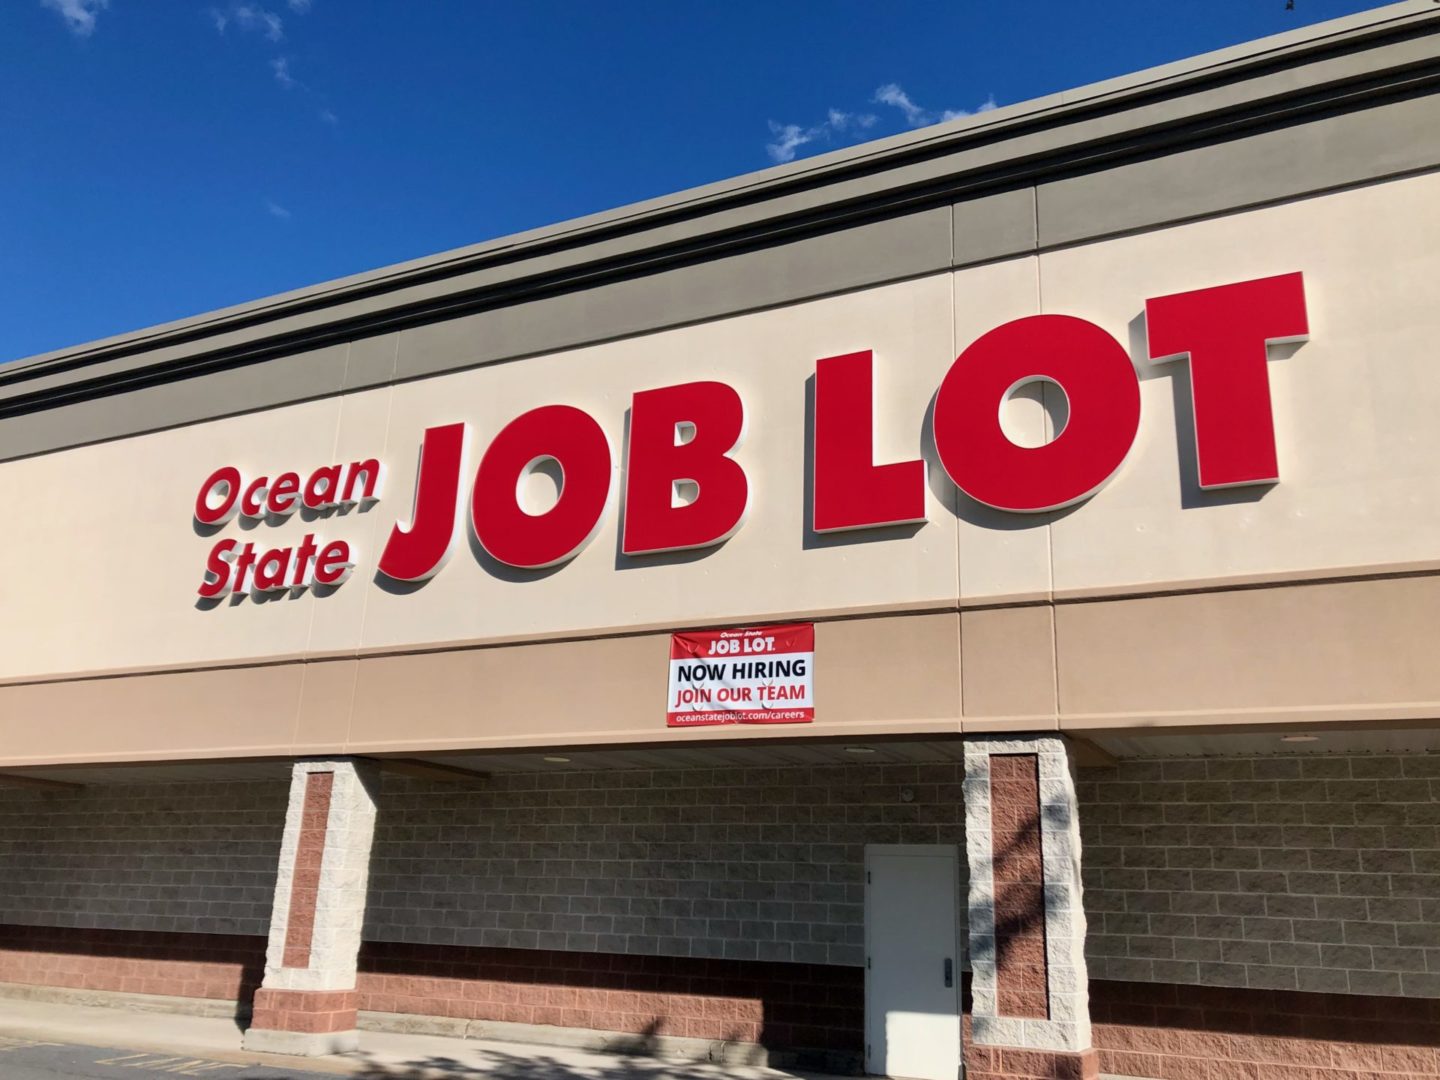 Ocean State Job Lot Opens New State College Area Location State